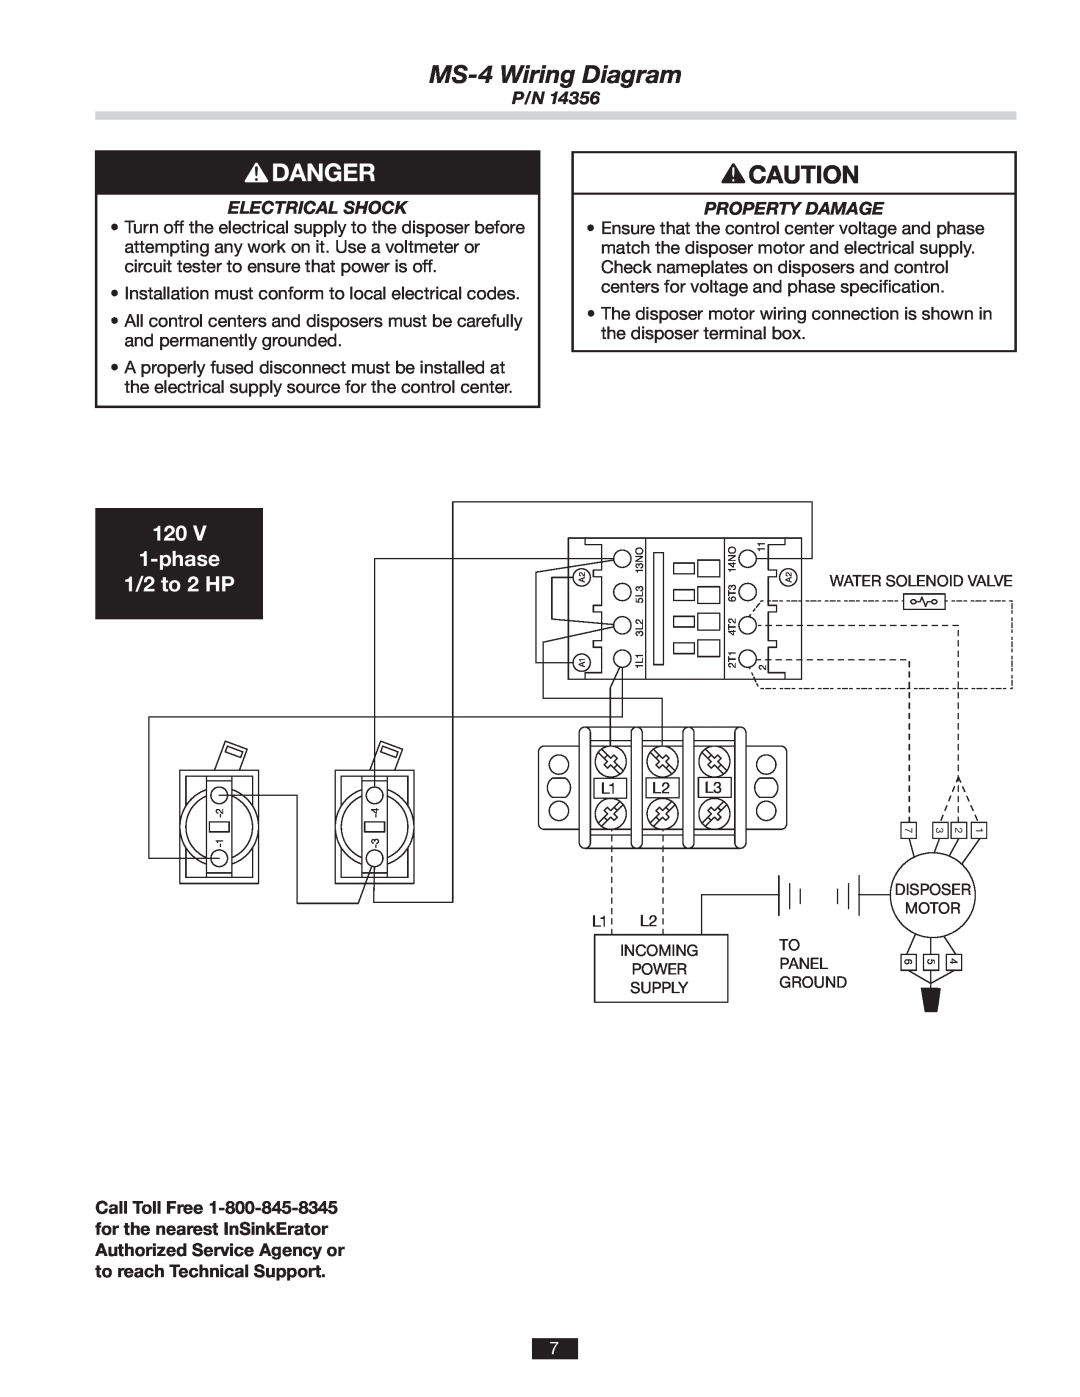 InSinkErator installation manual MS-4Wiring Diagram, 120V 1-phase 1/2 to 2 HP, Electrical Shock, Property Damage 